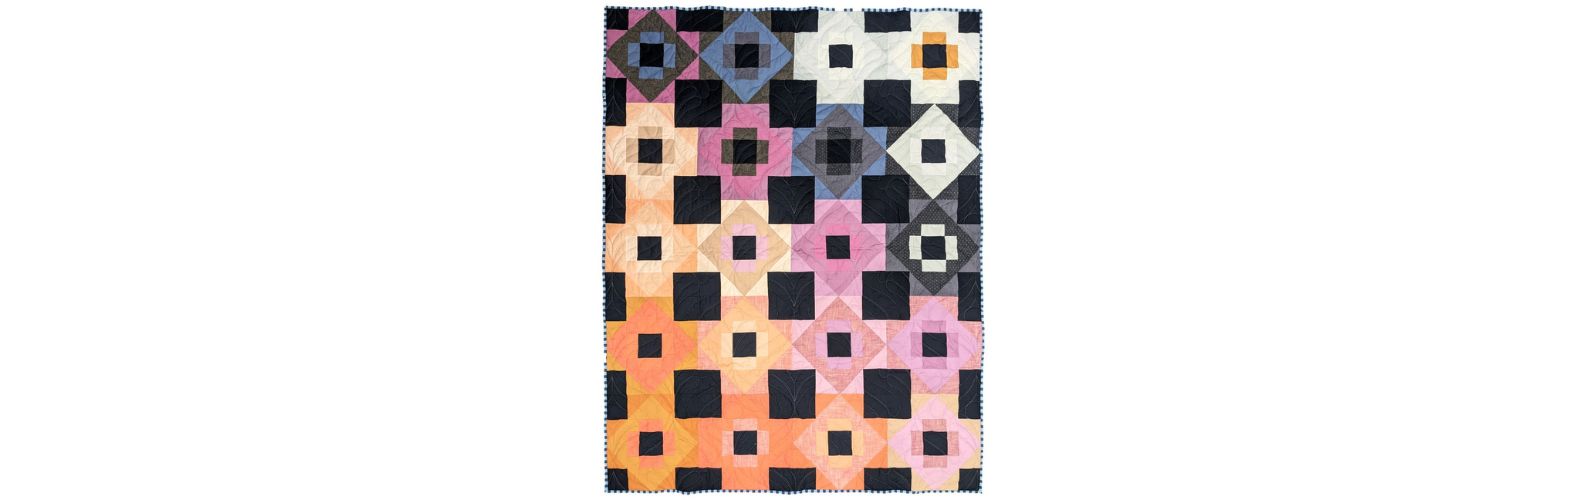 Limited Edition Meadowland Quilt Kit